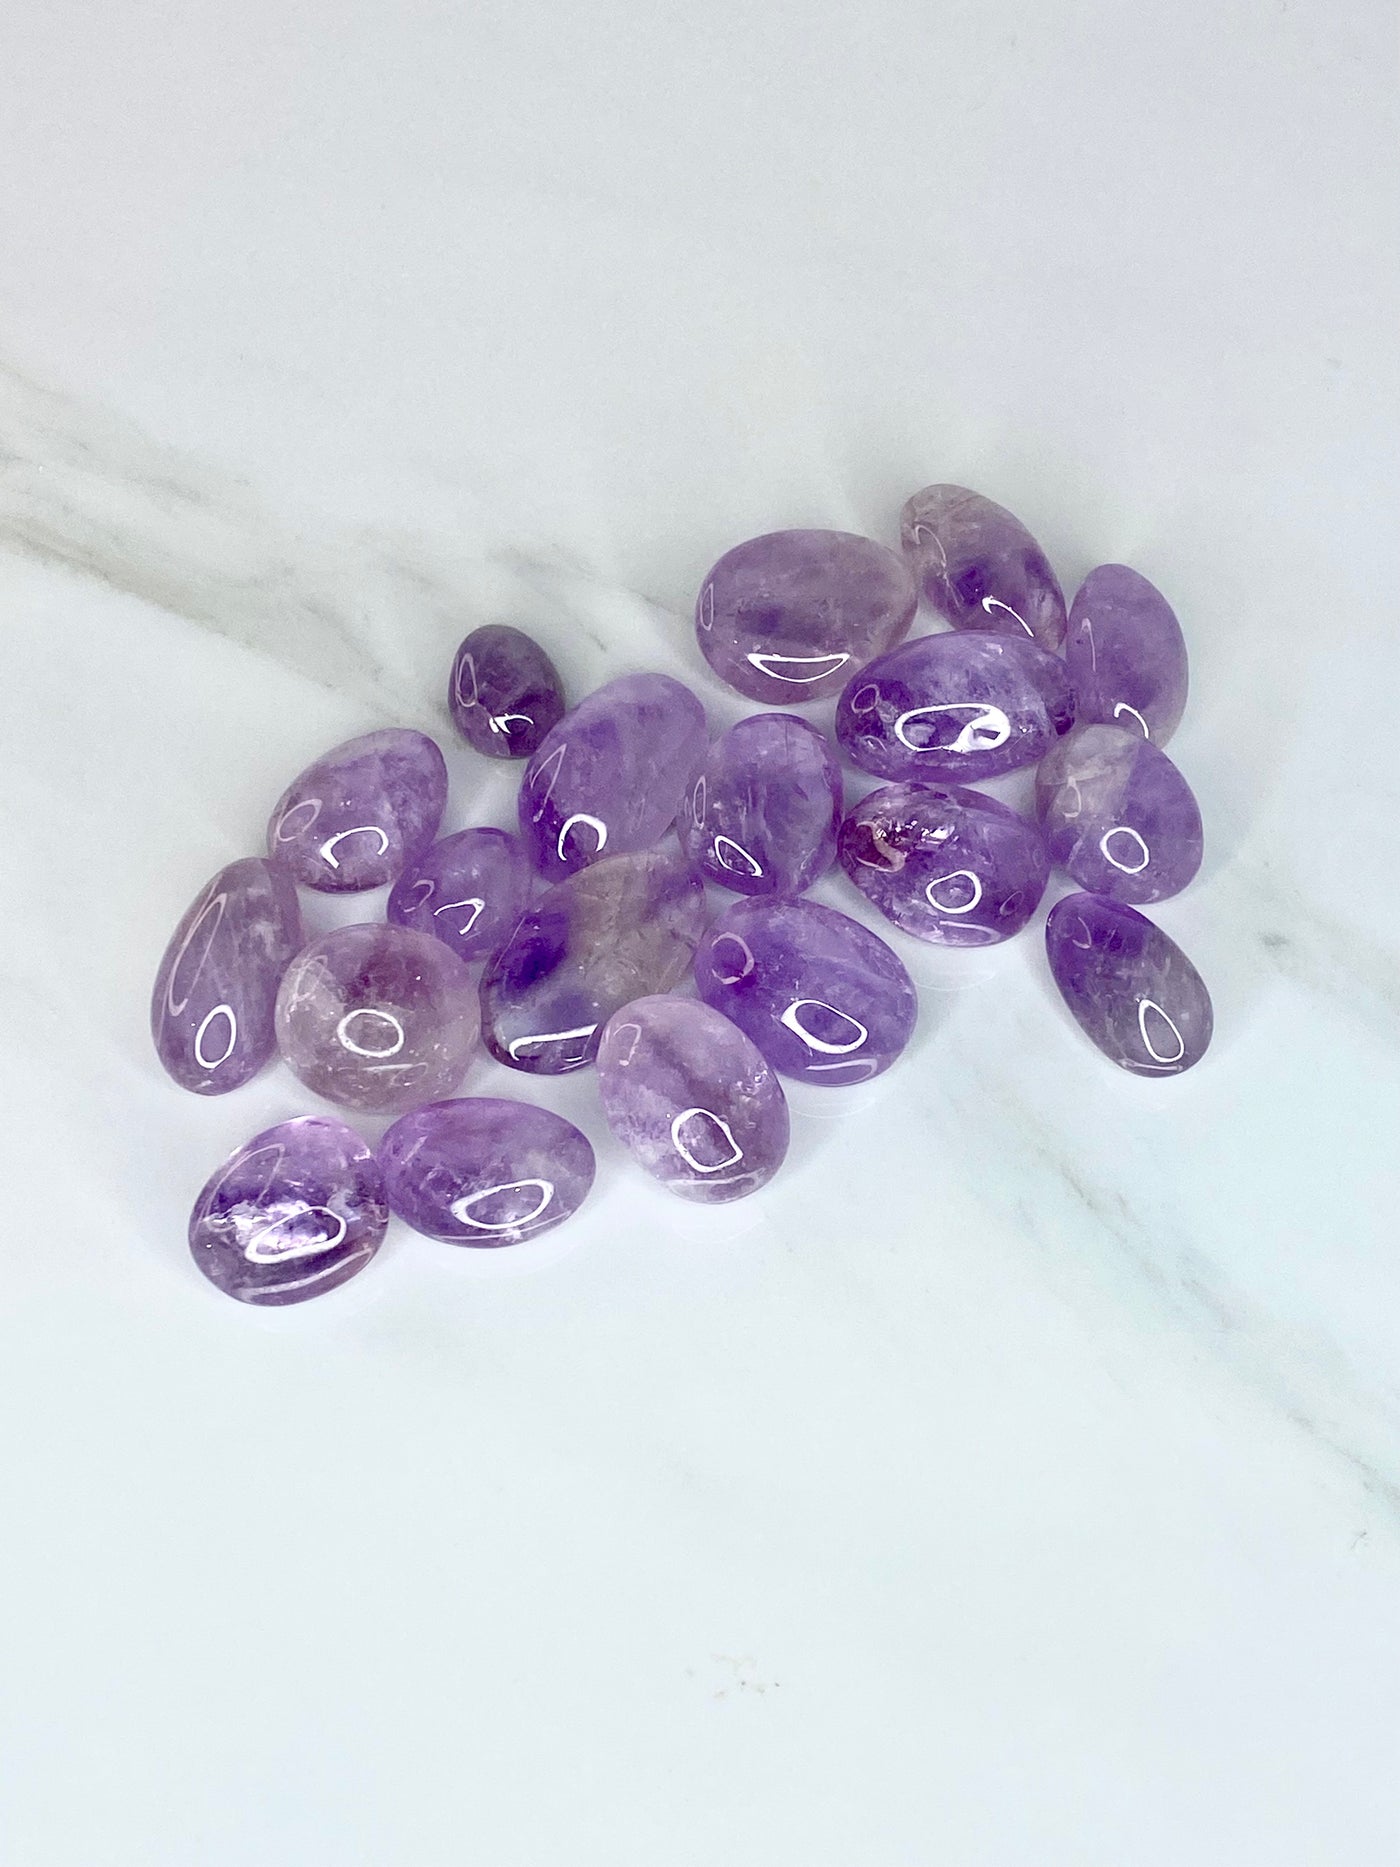 AMETHYST - The stone of Intuition